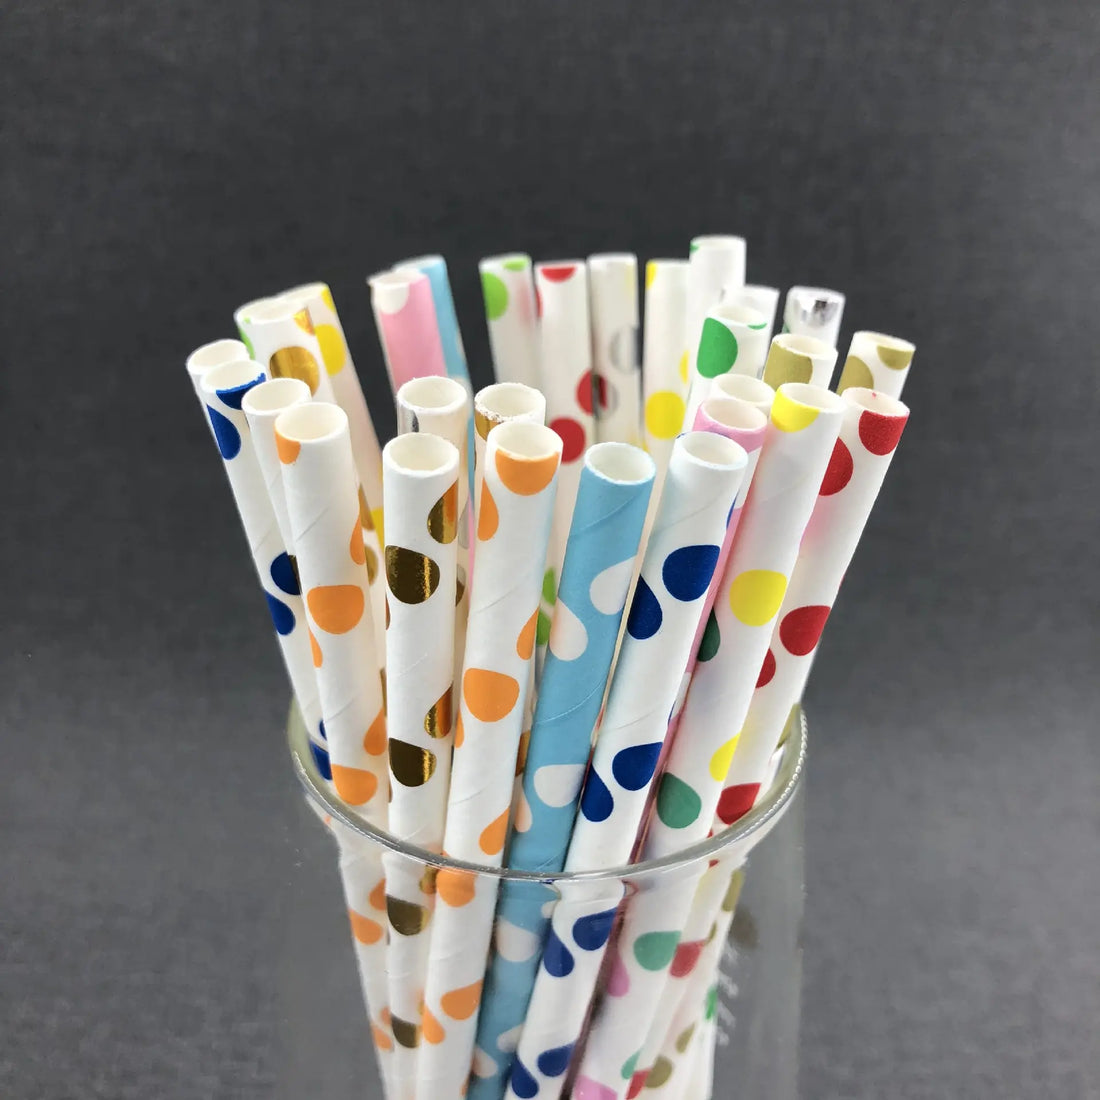 The Eco-Friendly Choice: A New Era for Paper Straws